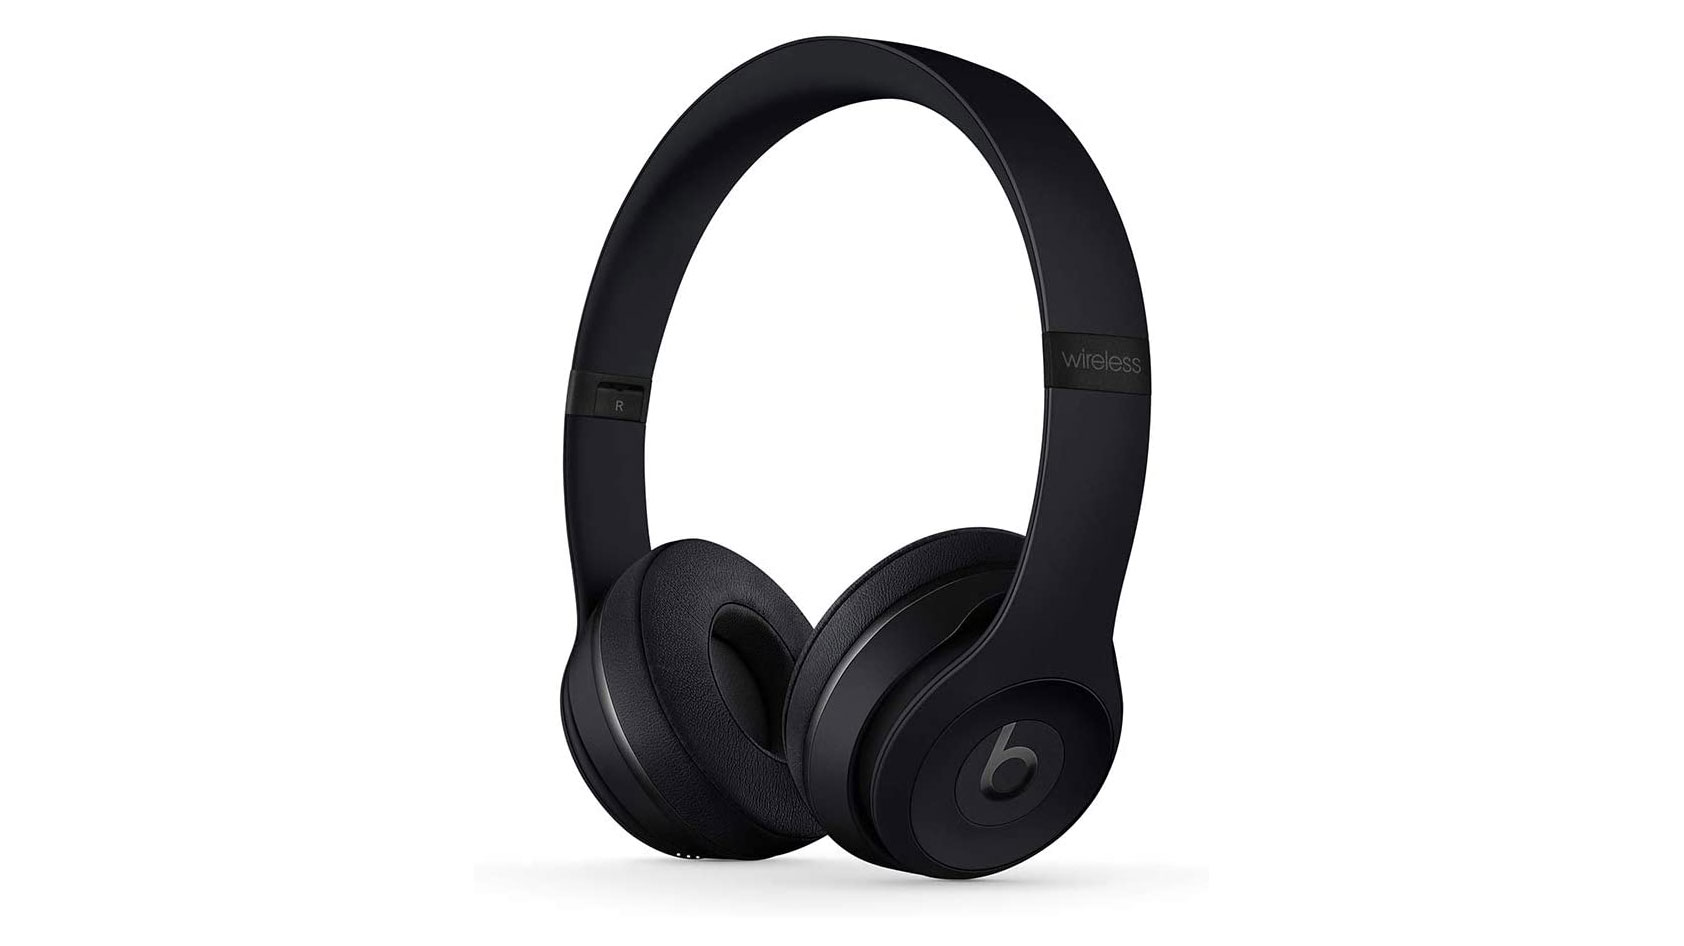 The Beats Solo3 Wireless headphones in black against a white background.